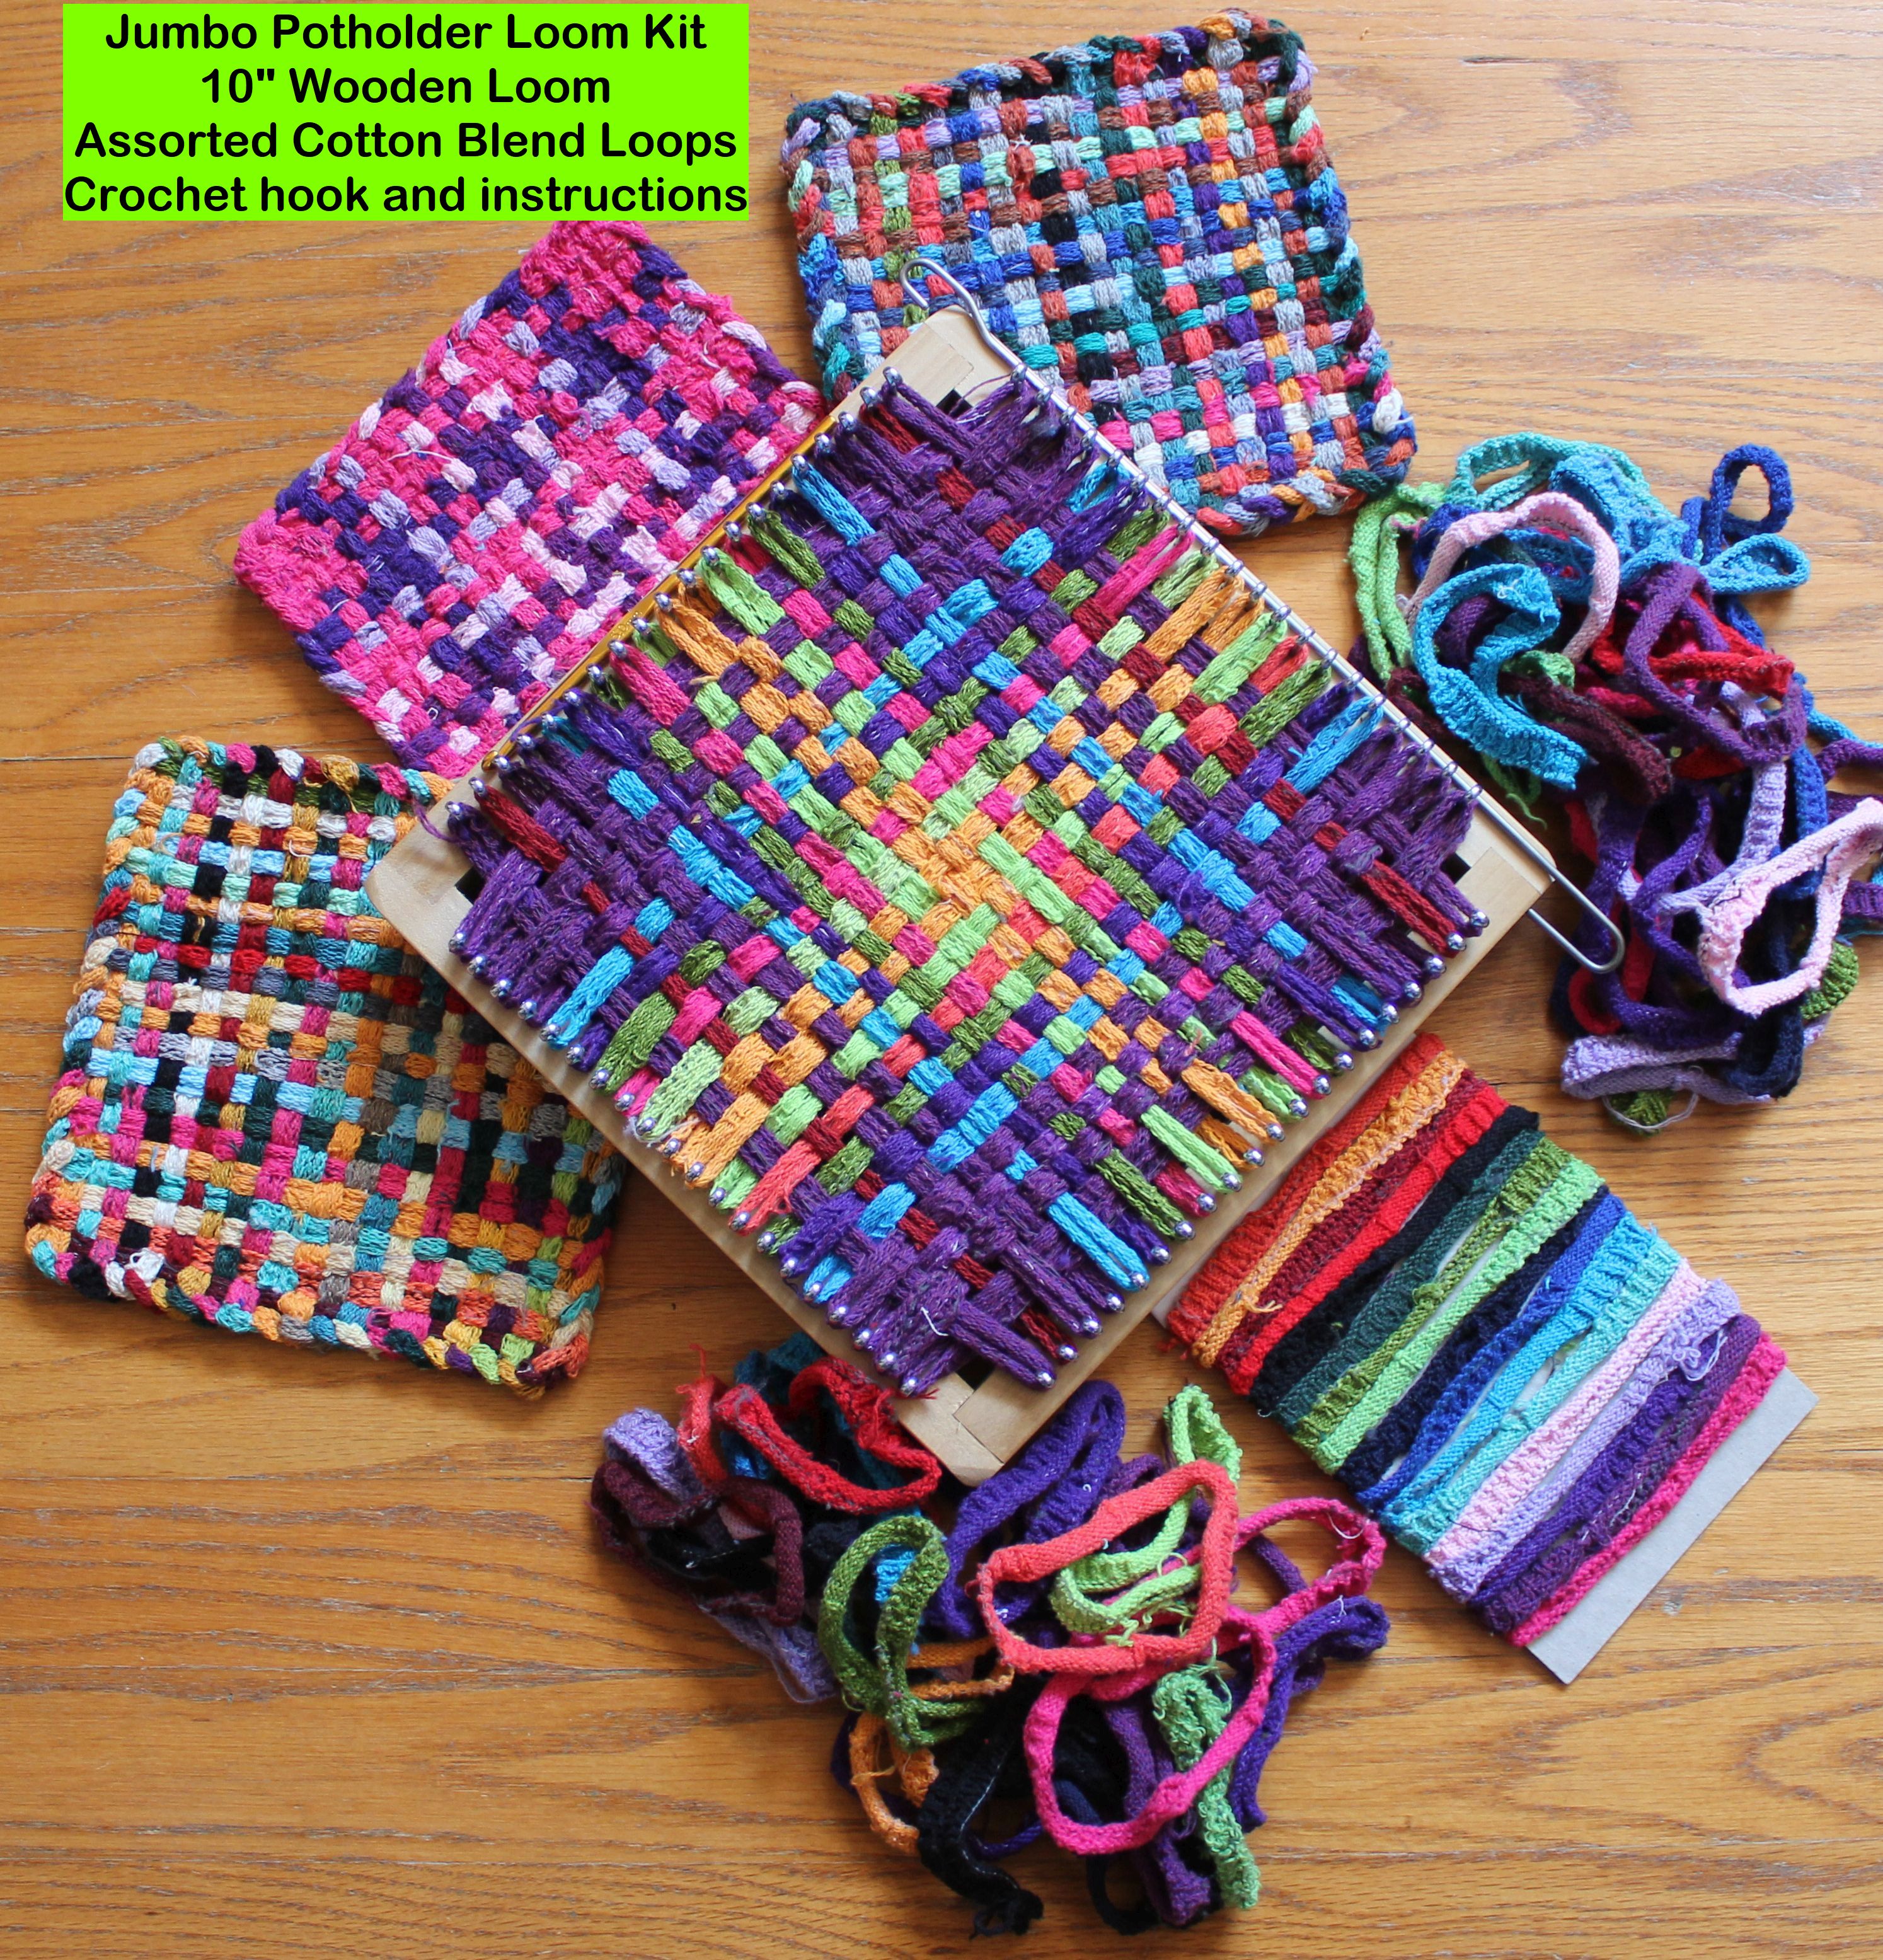 7 POTHOLDER LOOPS Fit Harrisville Traditional Loom, Assorted